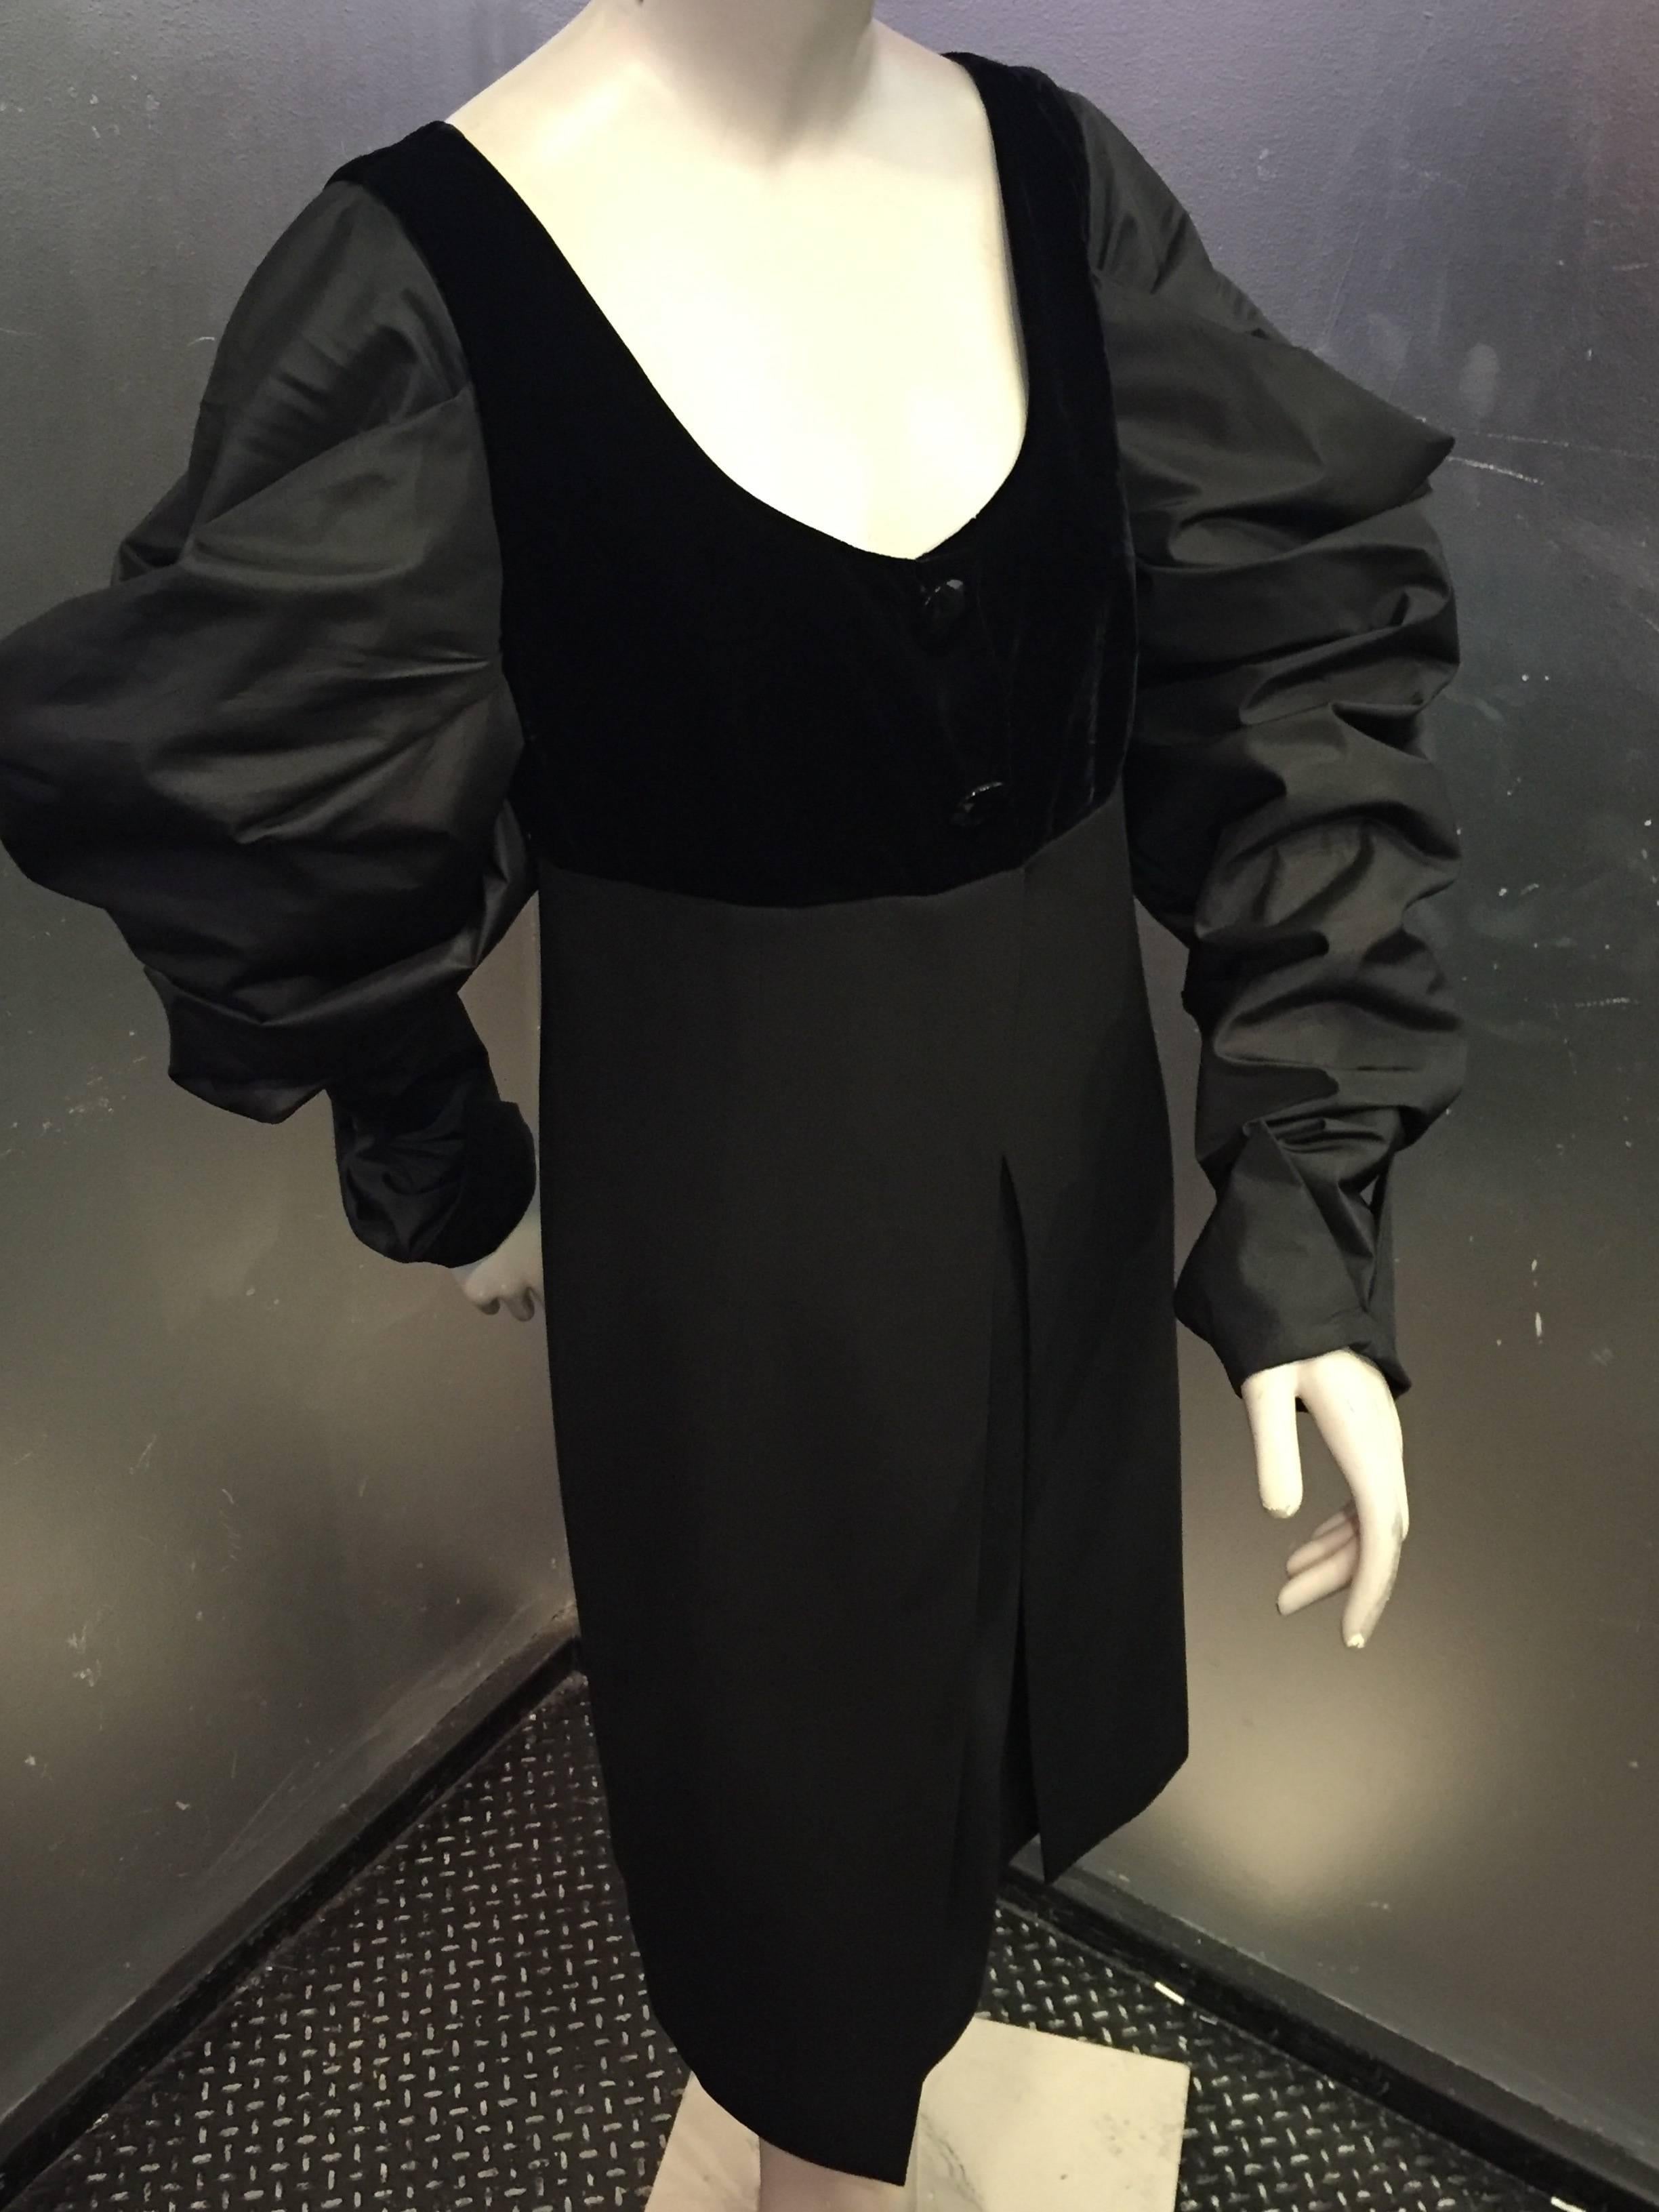 A sexy avant guarde 1980s Gianfranco Ferre knee-length black wool cocktail dress with sheer deep back and extreme leg-o-mutton silk sleeves.